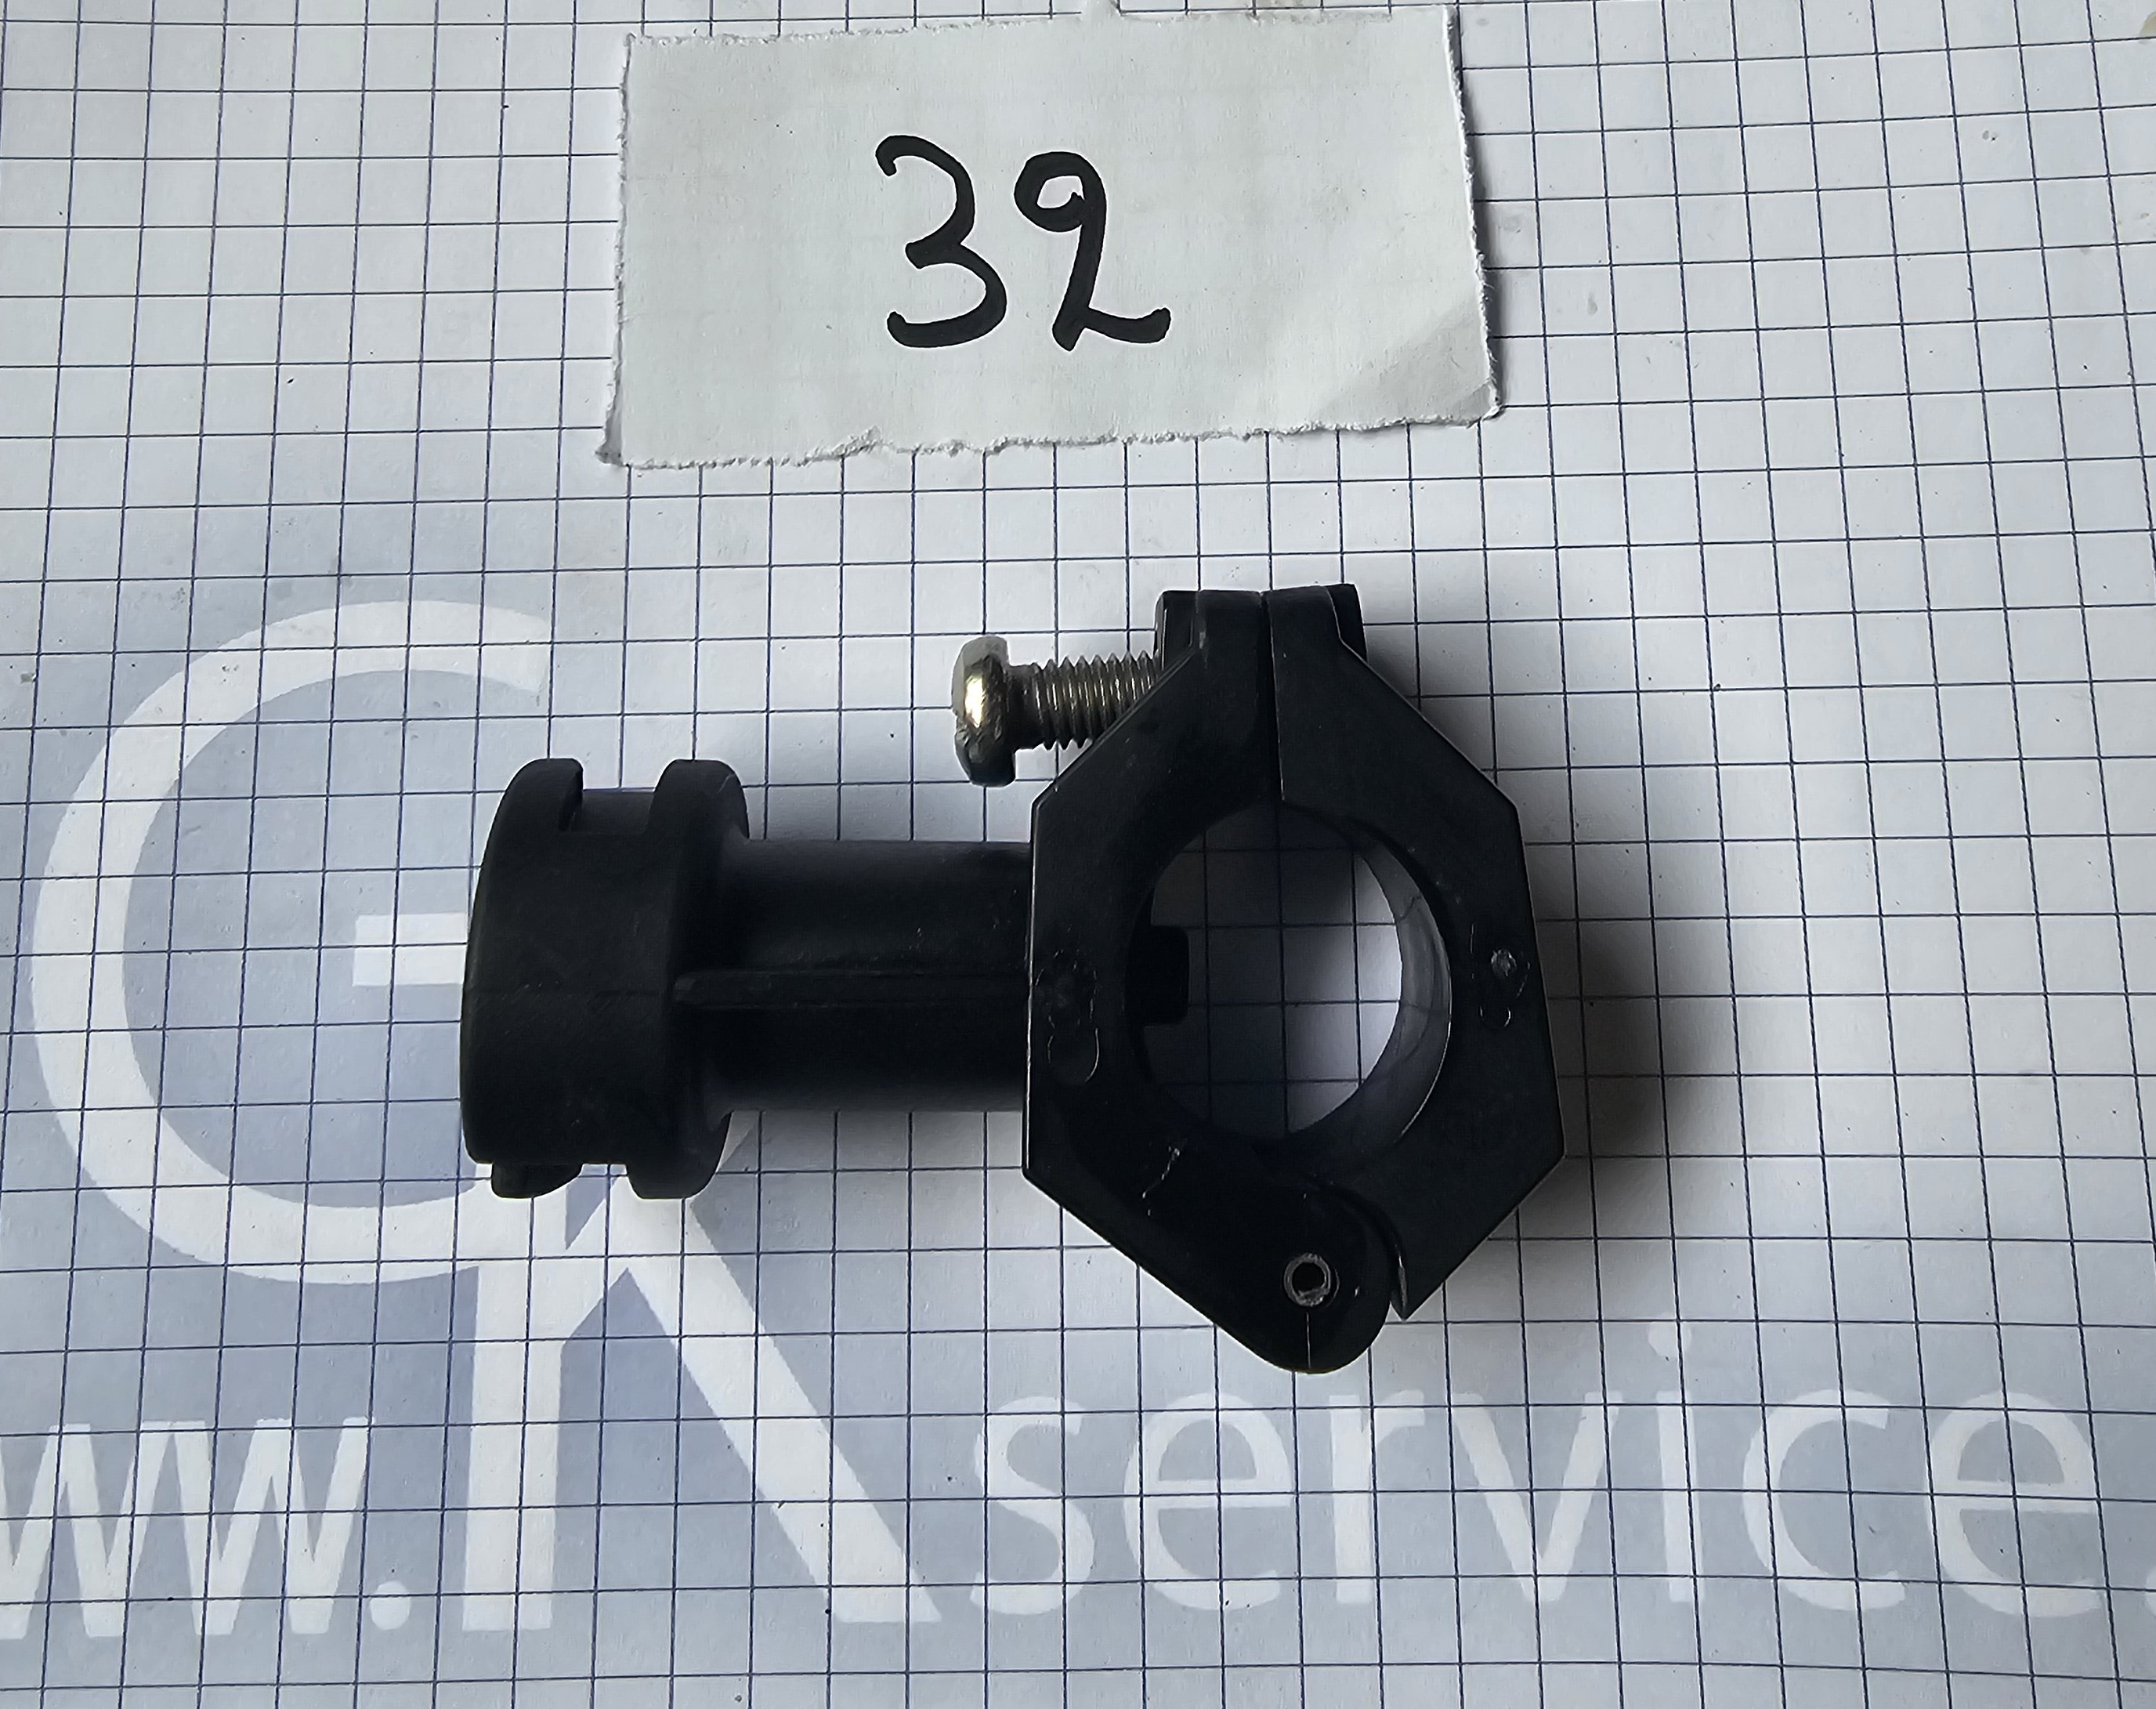 OND-056 Nozzle support